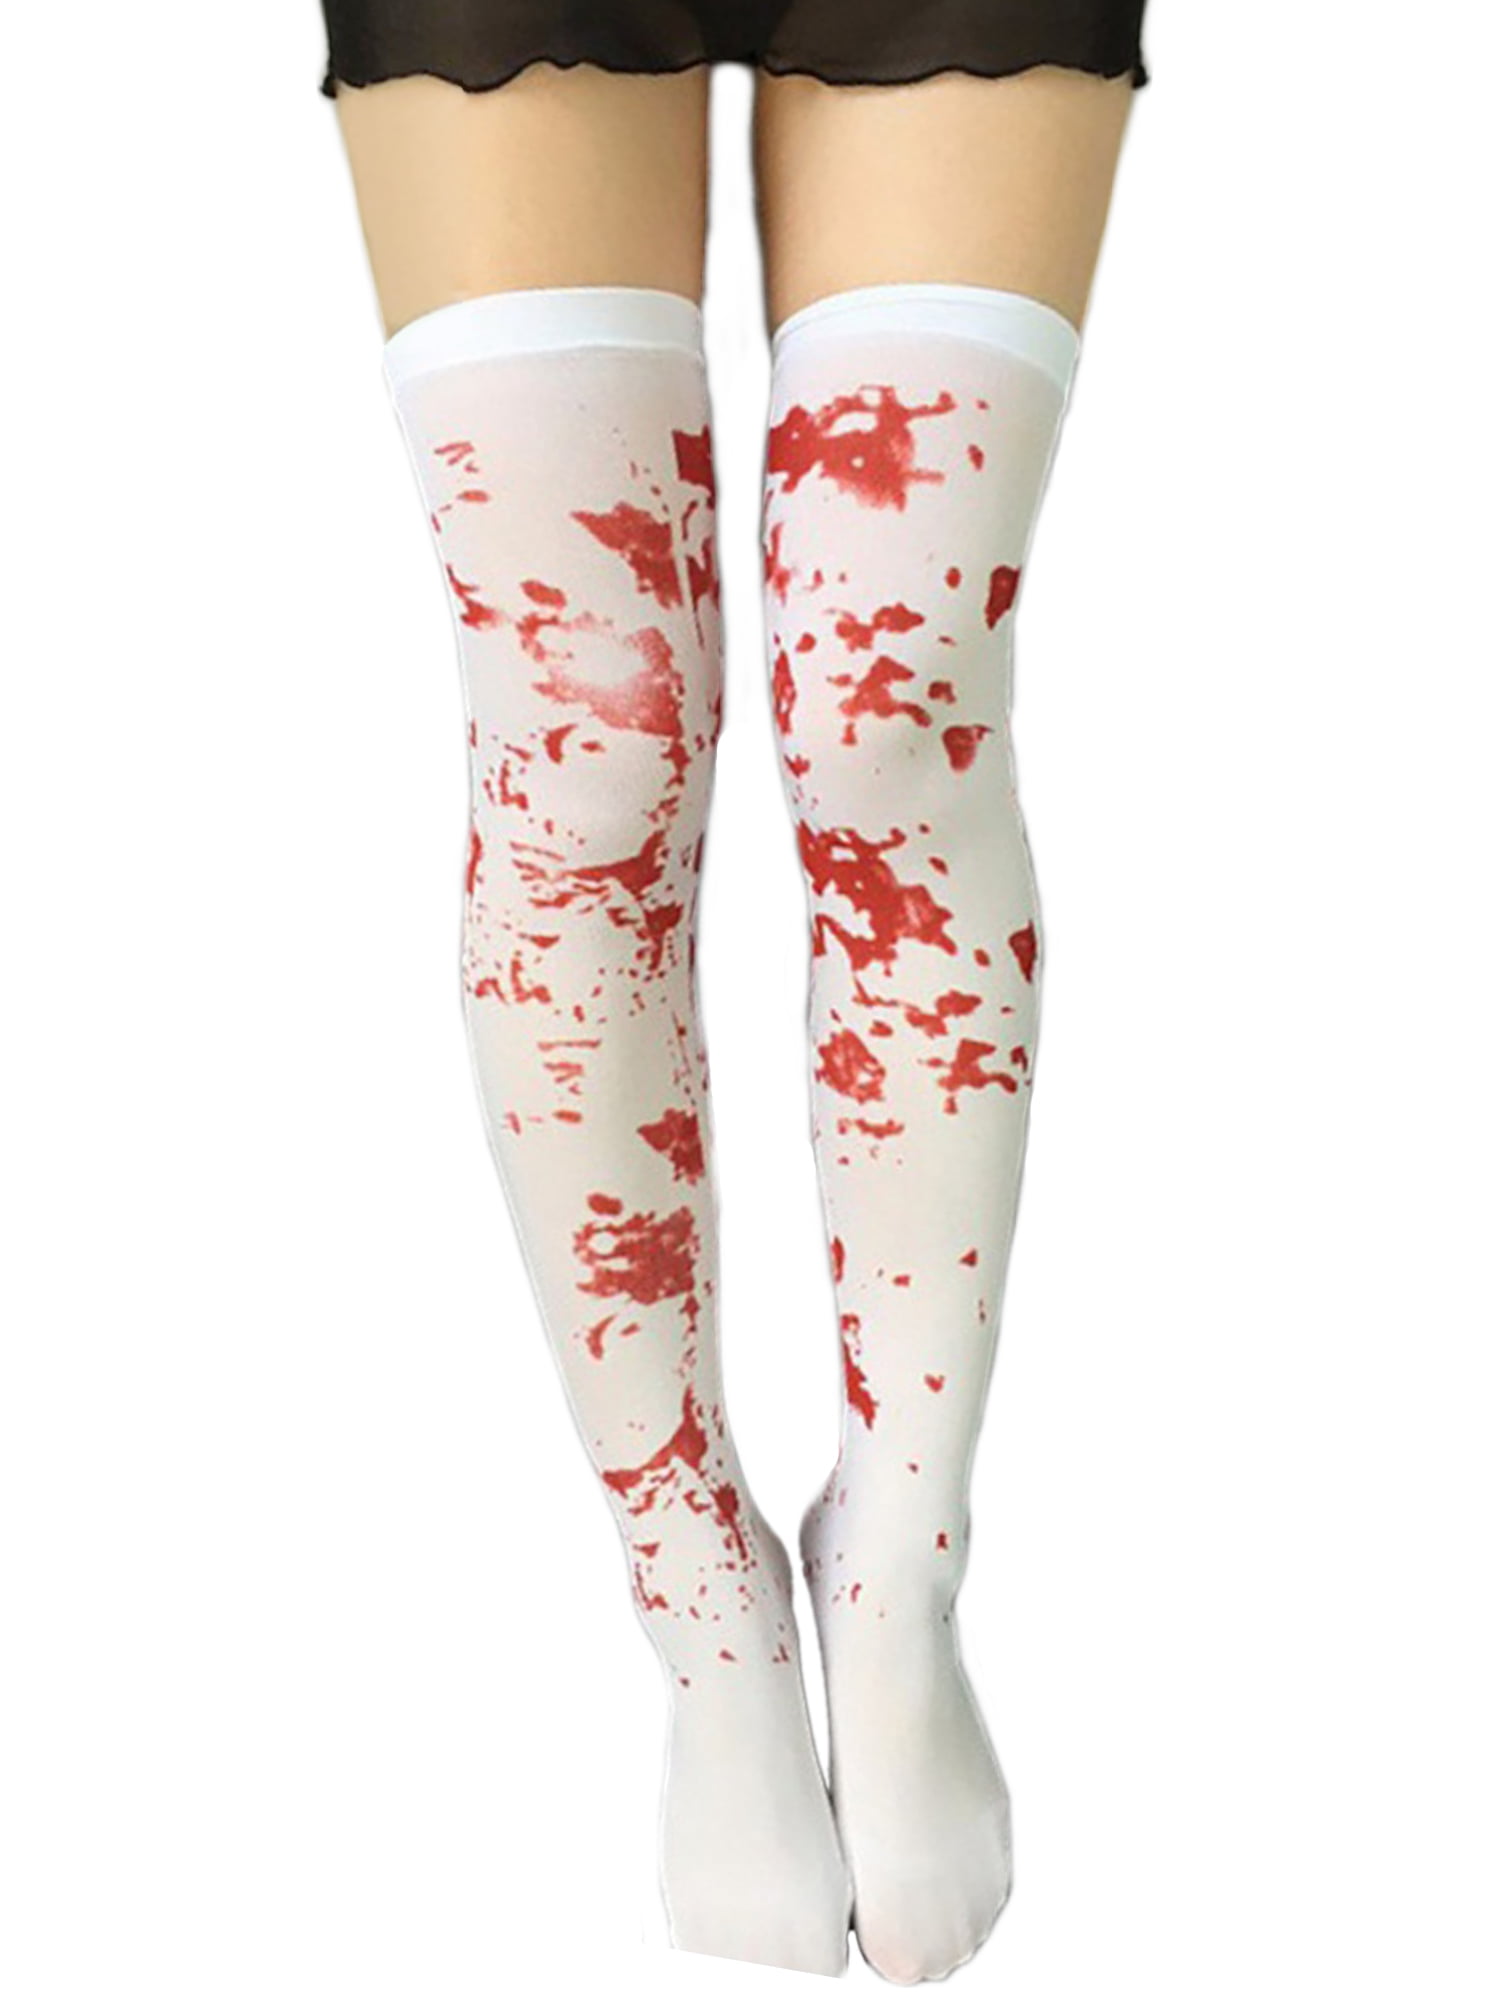 Ladies Halloween Tights Blood Stained Zombie Fancy Dress Costume Accessory New 